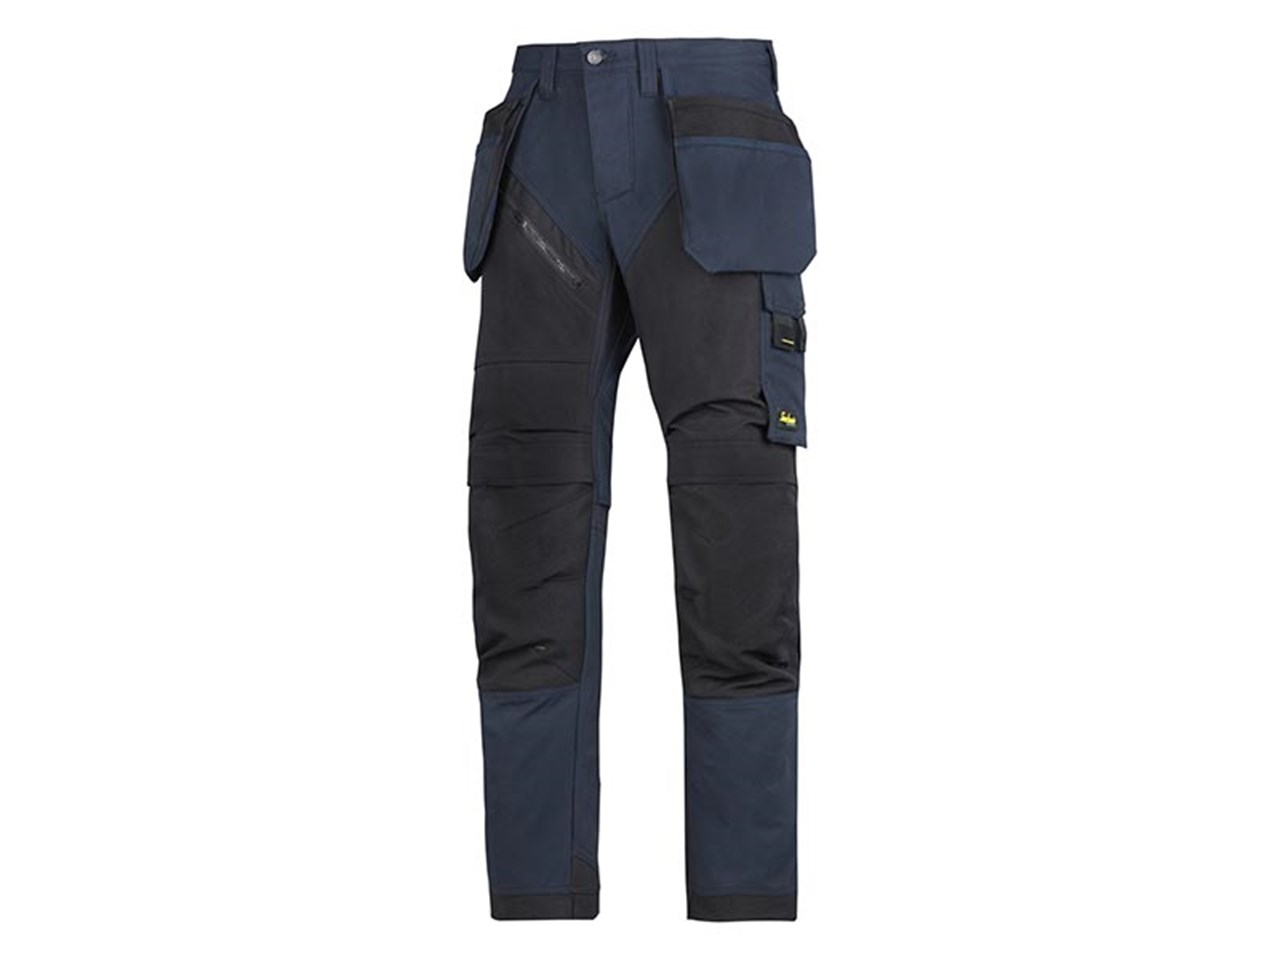 Snickers 62039504148 RuffWork Trousers with Holster Pockets Navy 33T